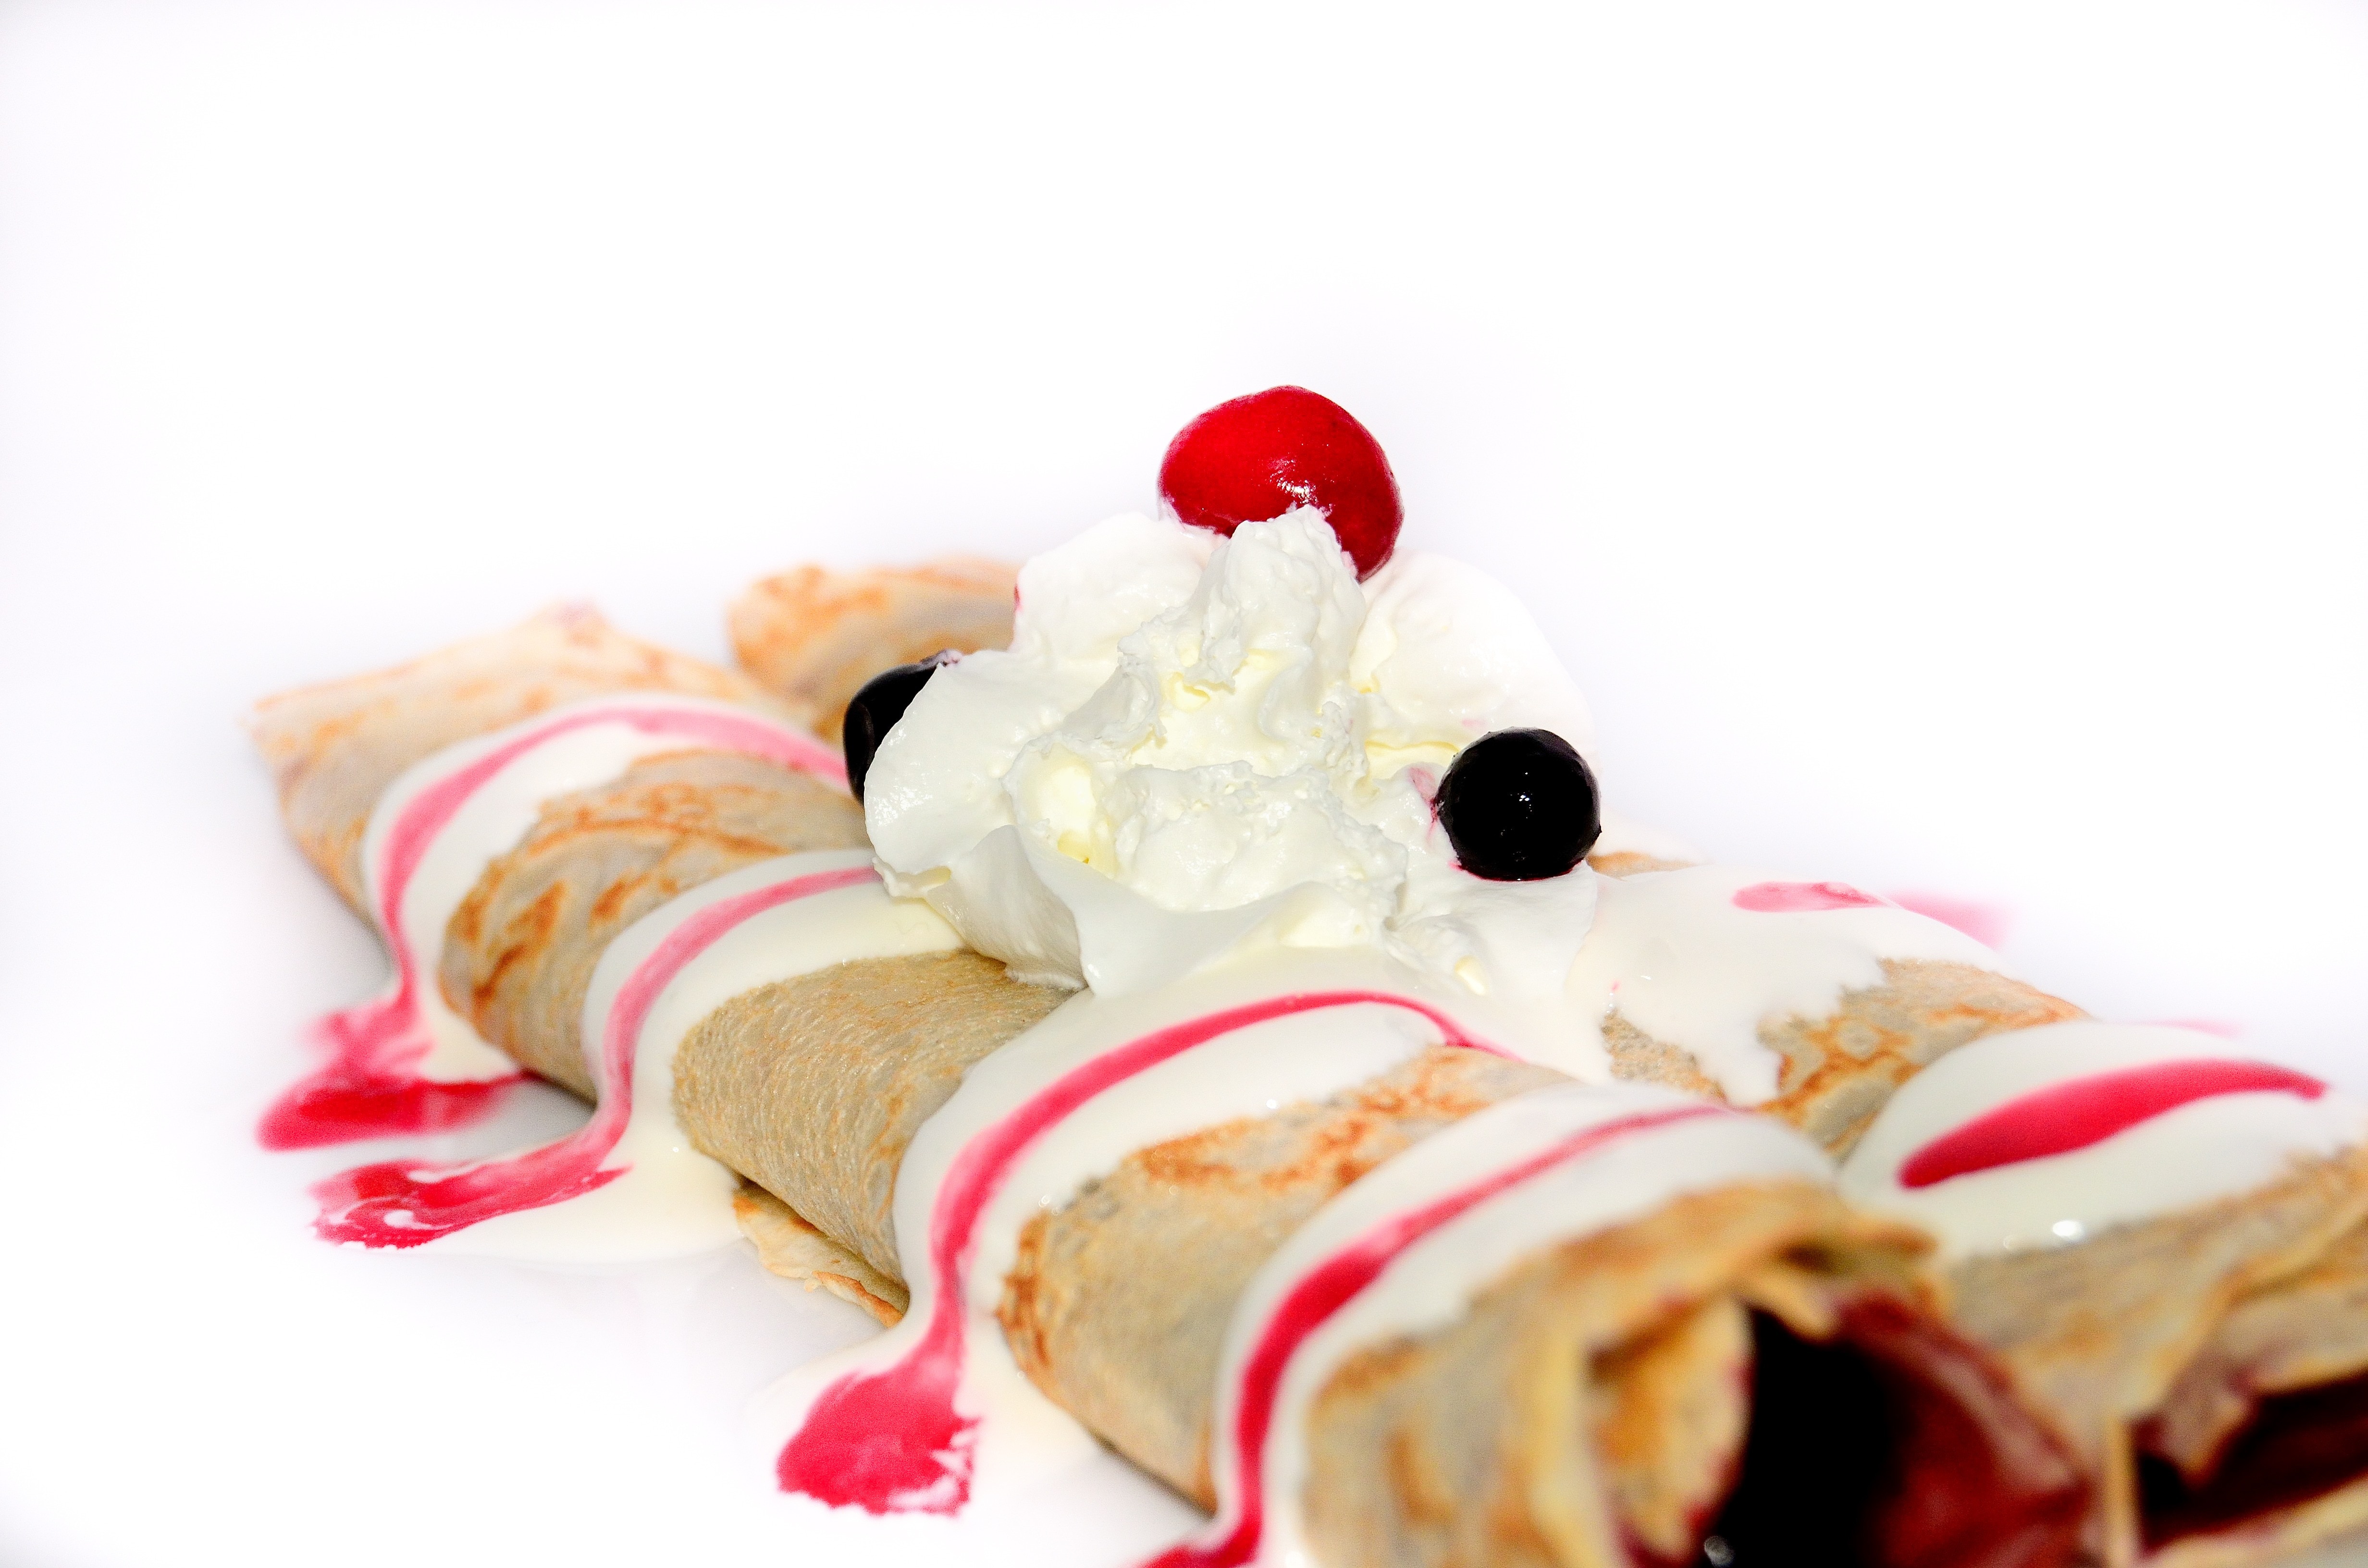 pastry desert with cream toppings